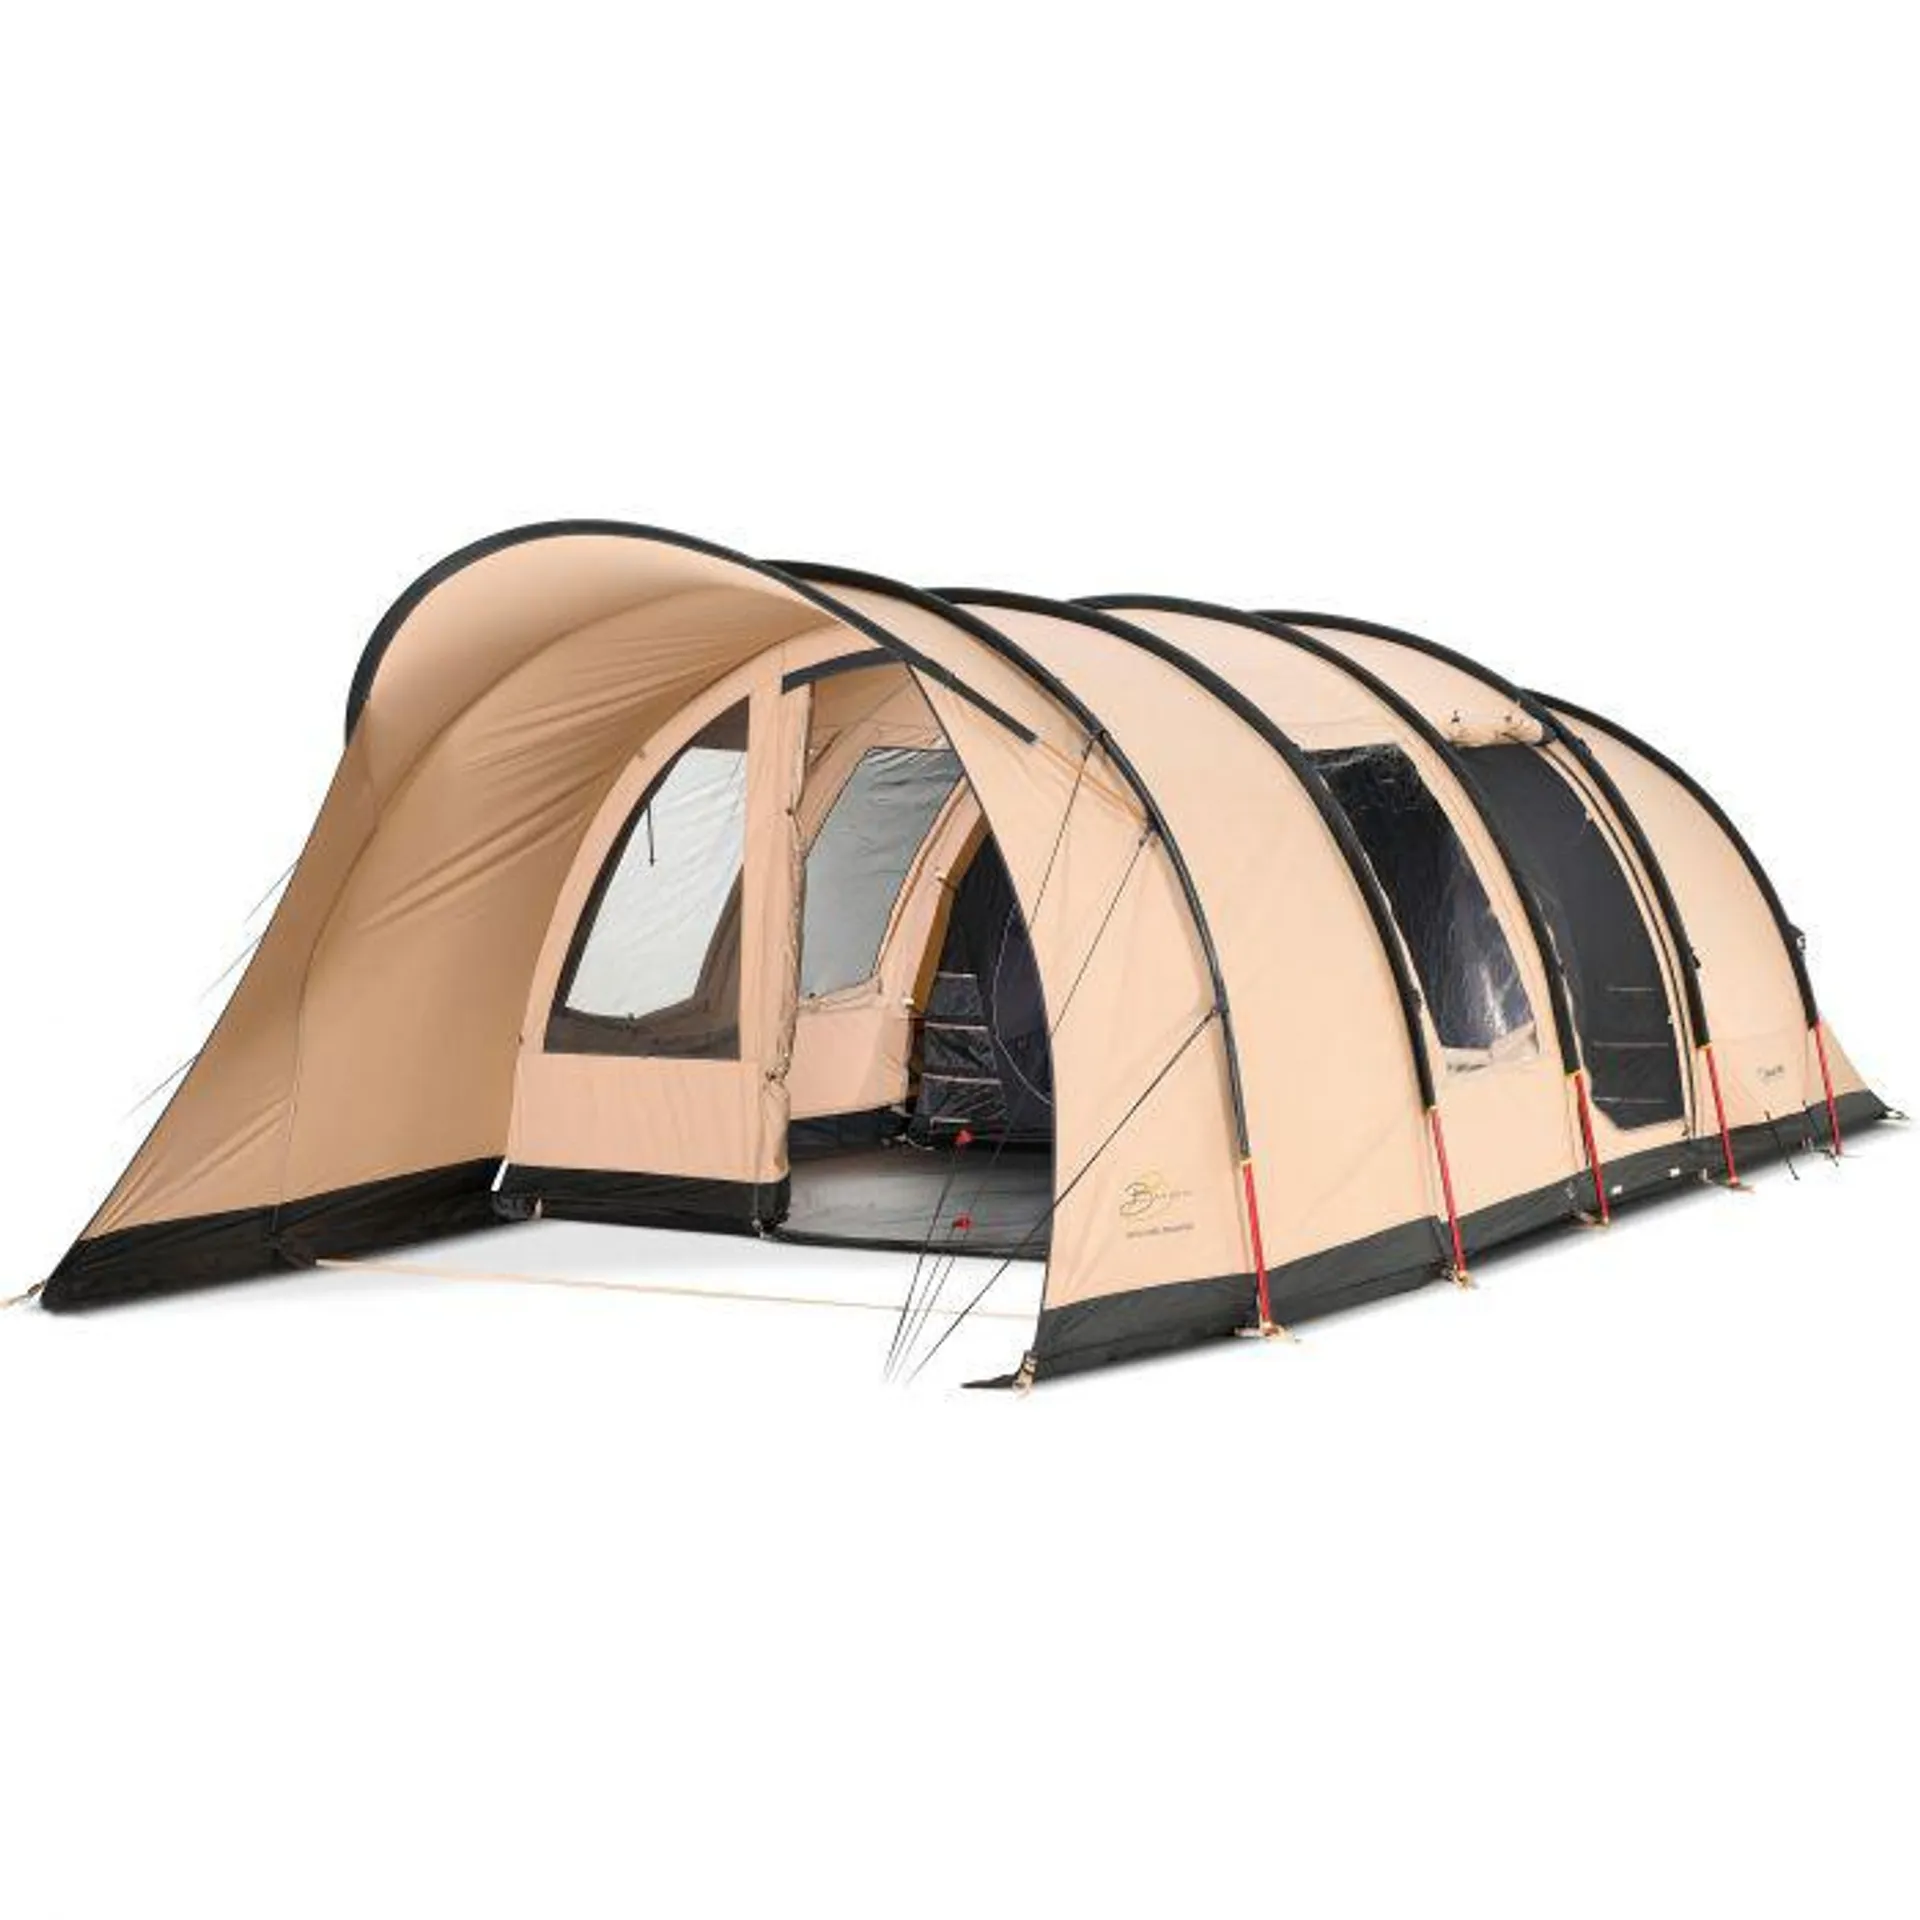 Spitfire 340 XL Deluxe RSTC tunneltent